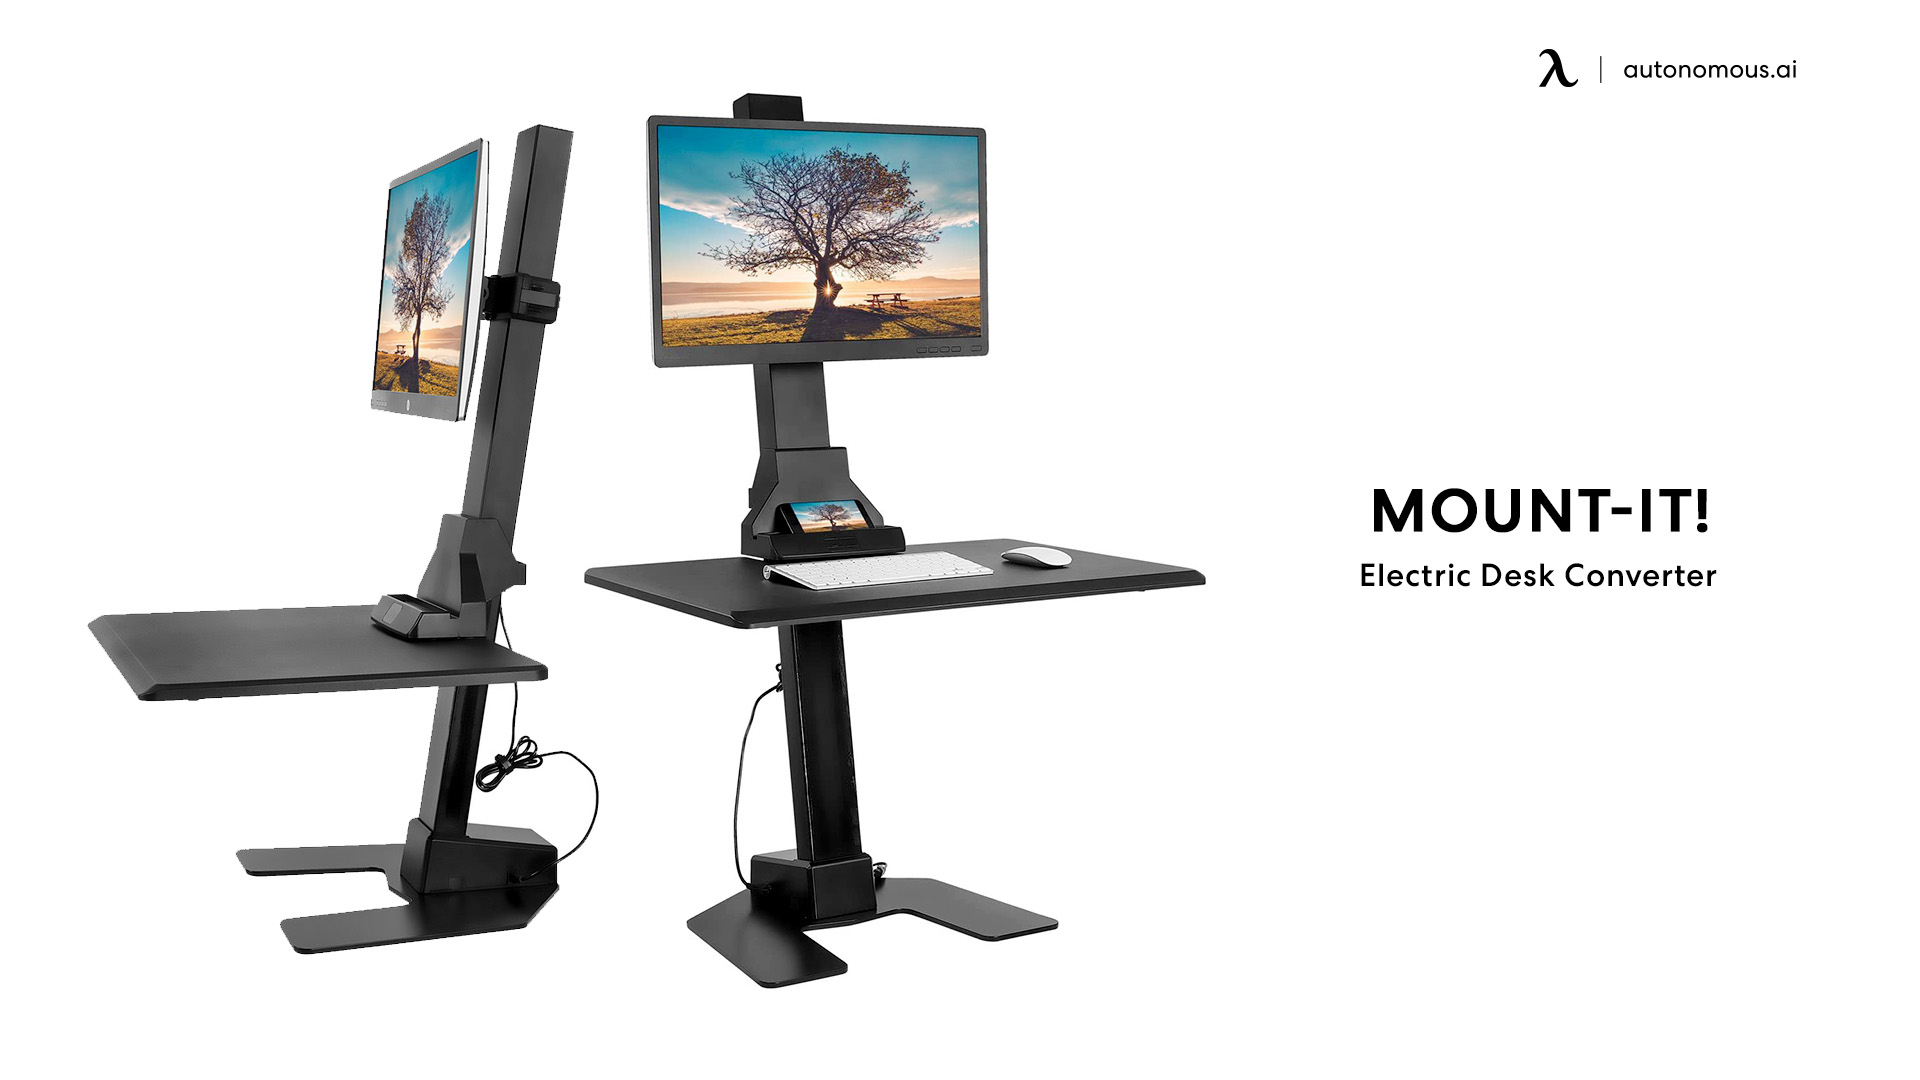 Electric desk monitor stand riser by Mount-It!